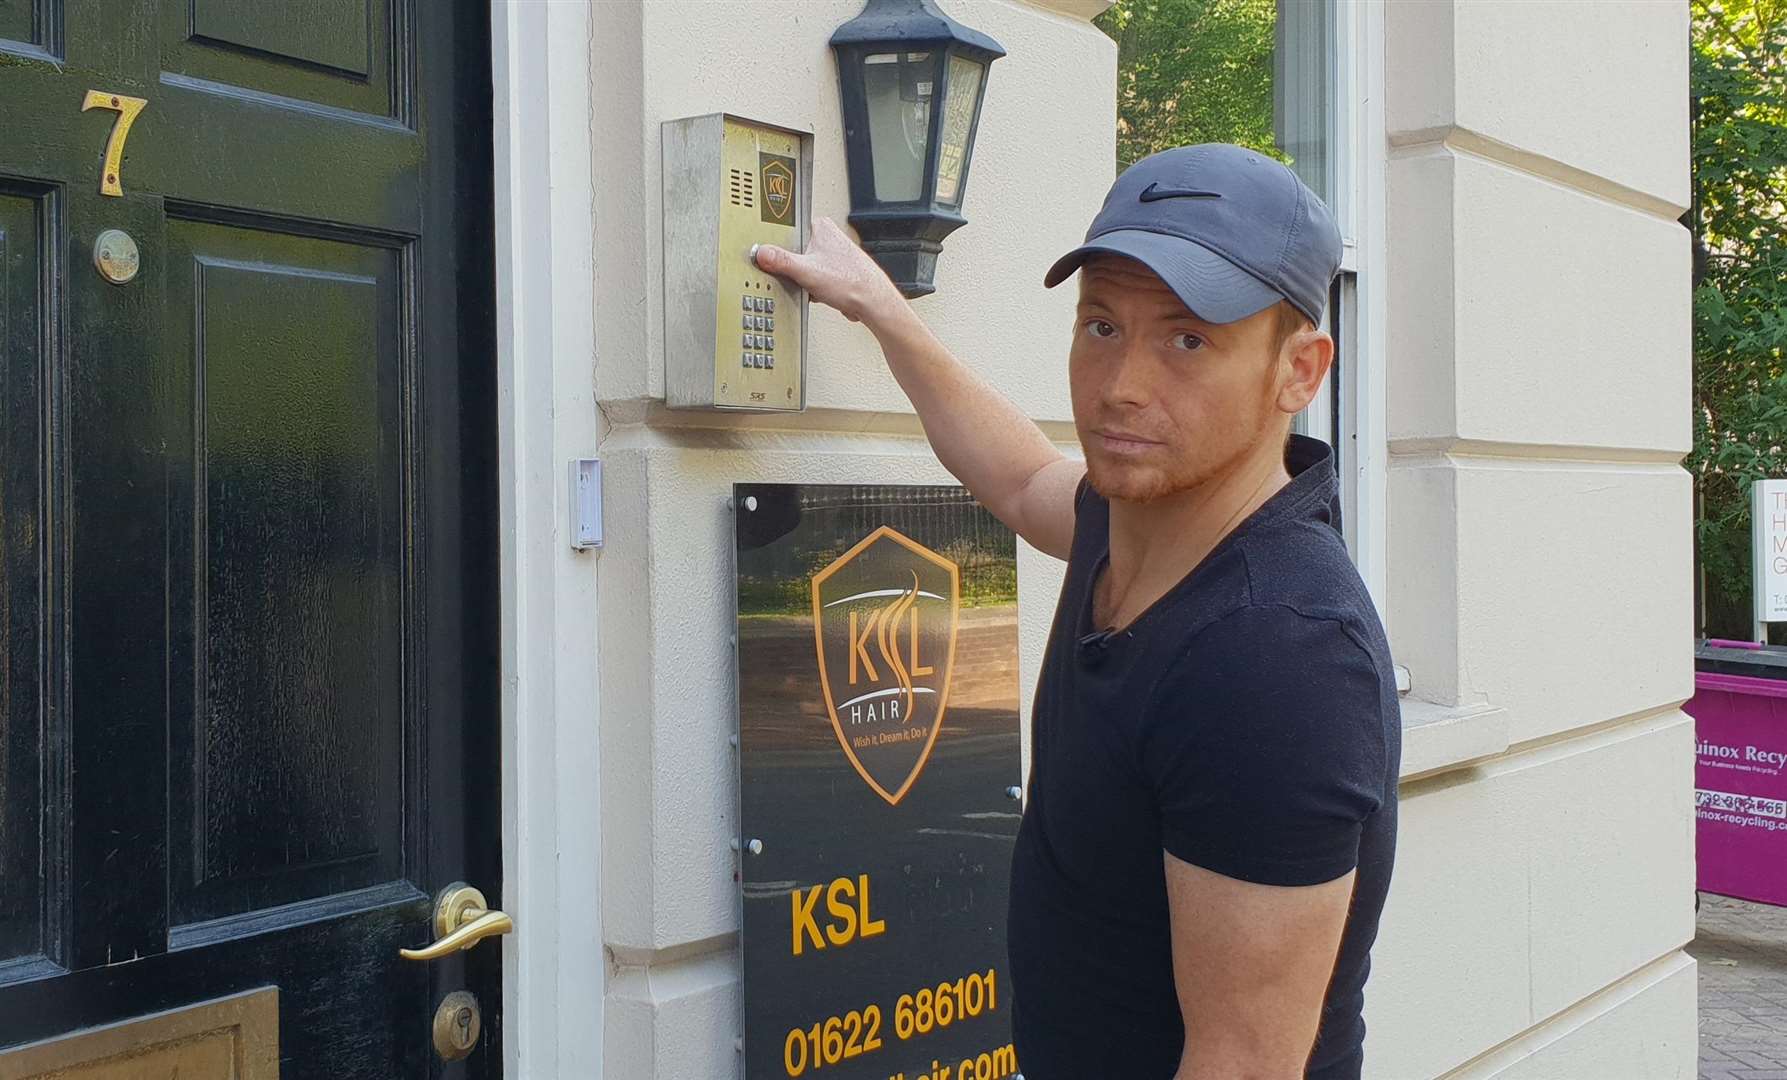 Joe Swash arrives at the KSL clinic in Maidstone (2664083)